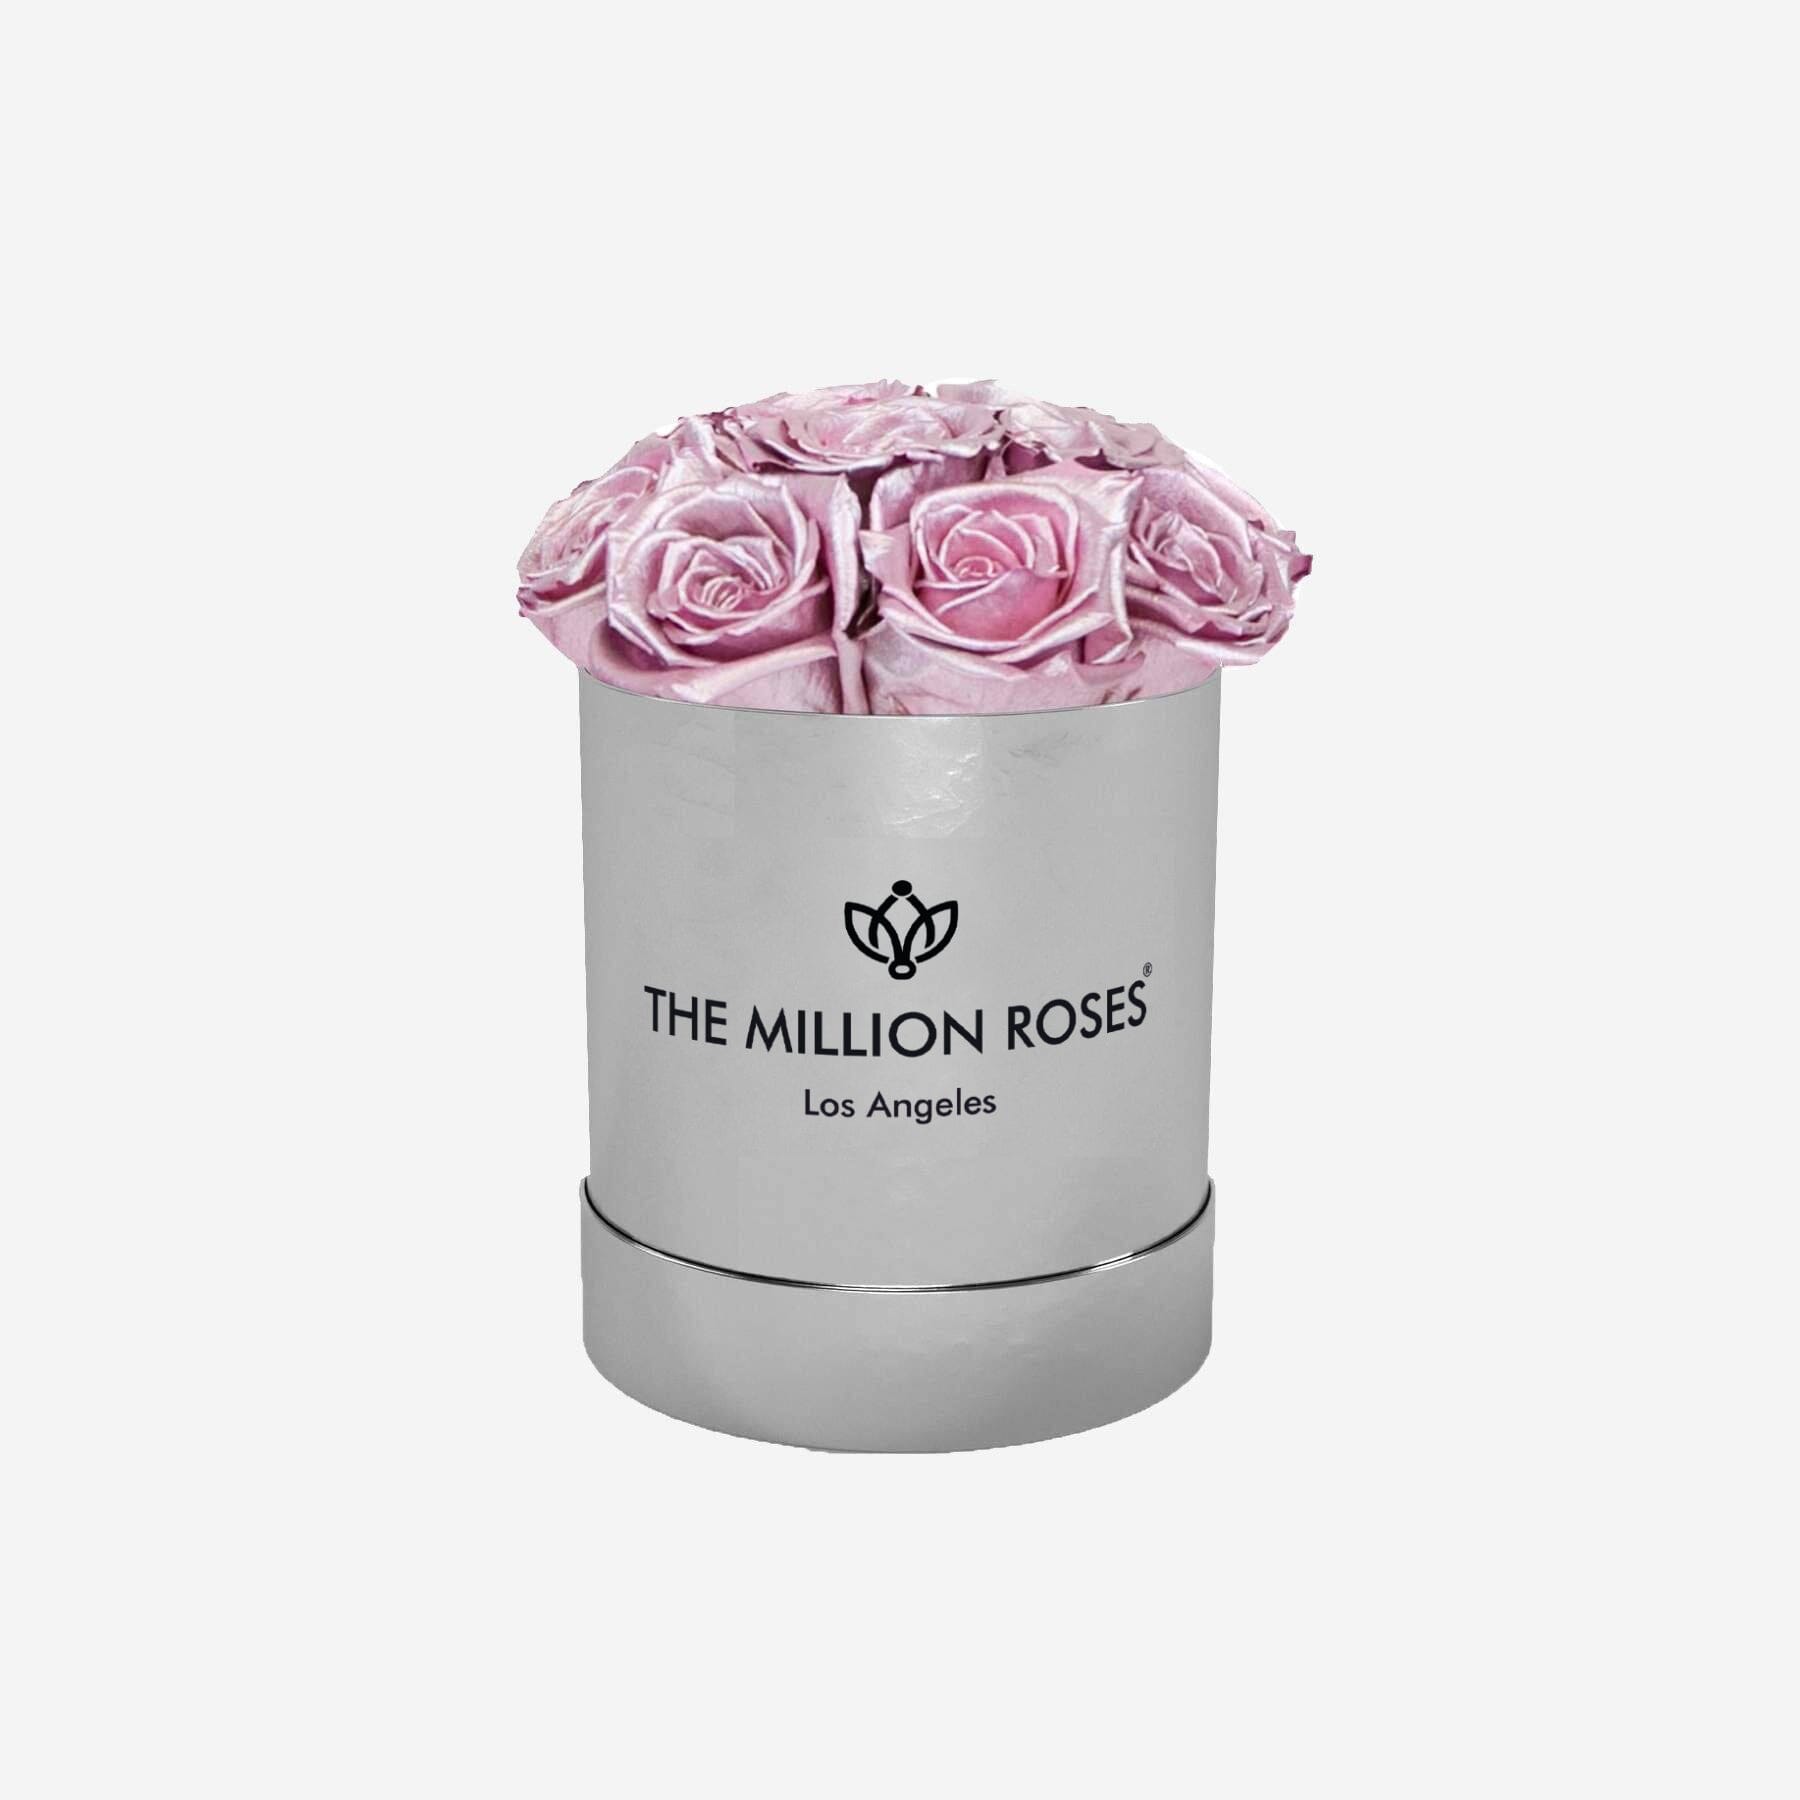 Basic Mirror Silver Box | Pink Gold Roses - The Million Roses